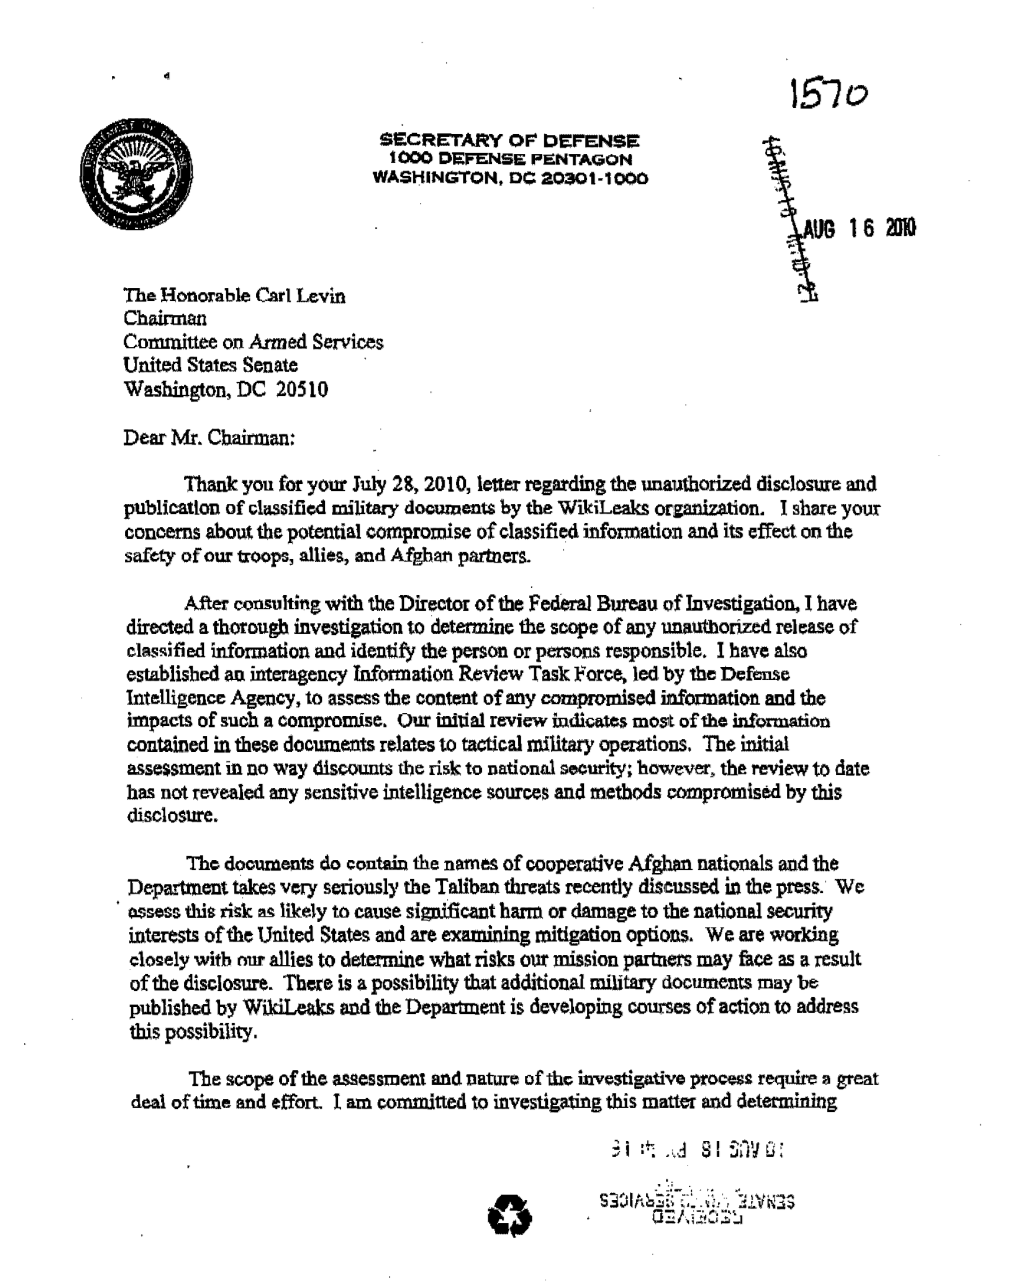 Initial Dod Assessment of Wikileaks Release of Classified Afghan War